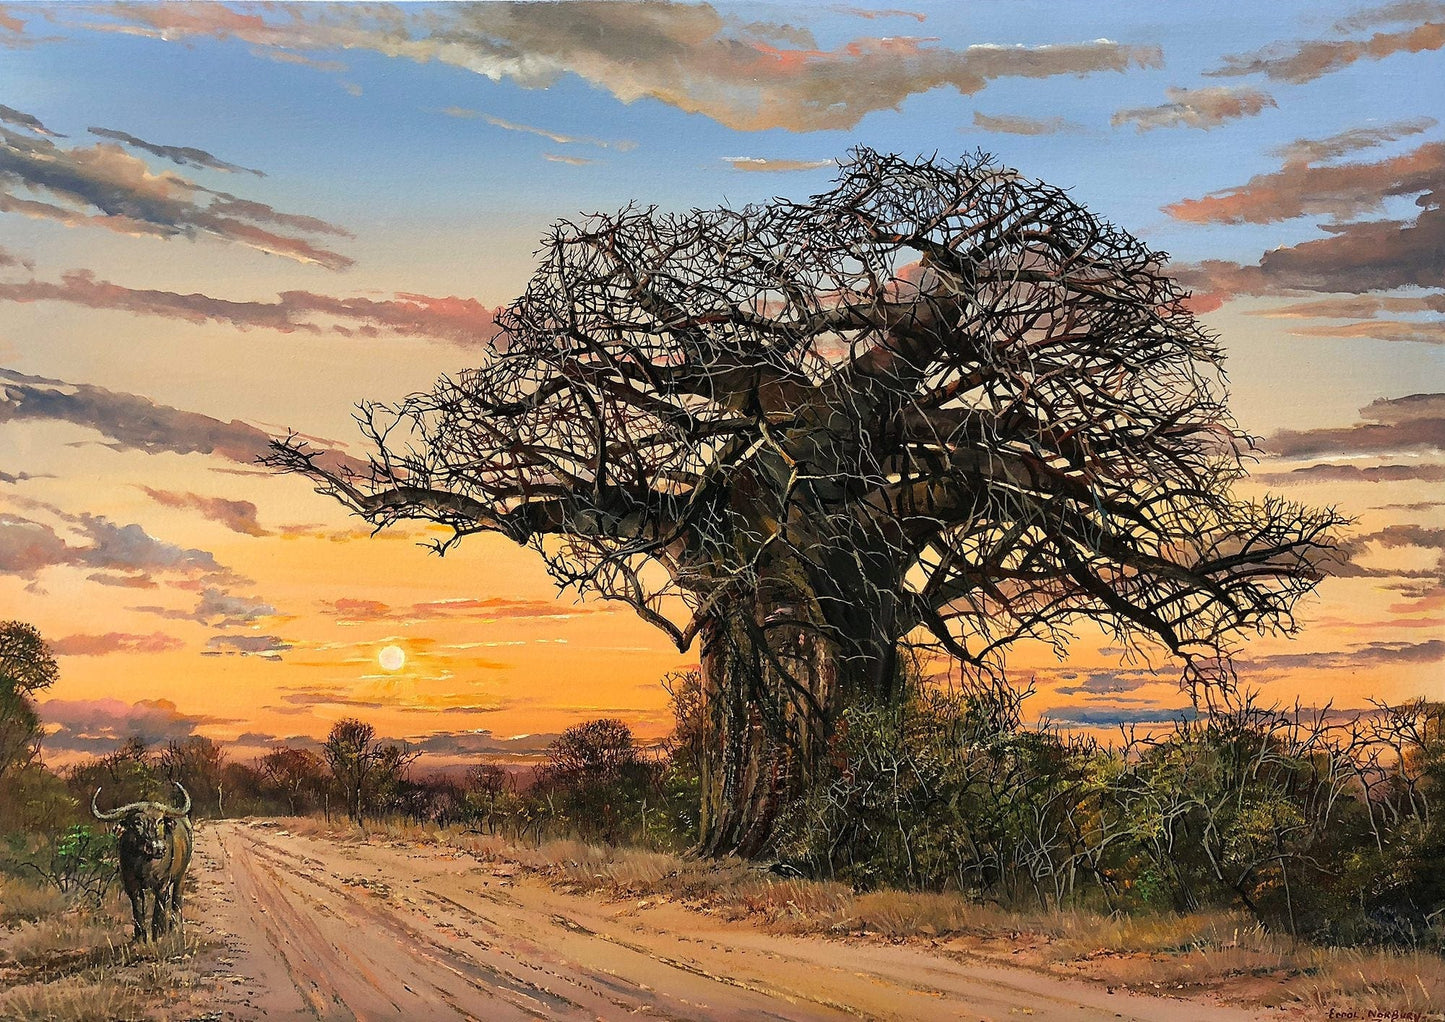 Original oil on canvas painting by artist Errol Norbury of old baobab tree with buffalo at sunset.